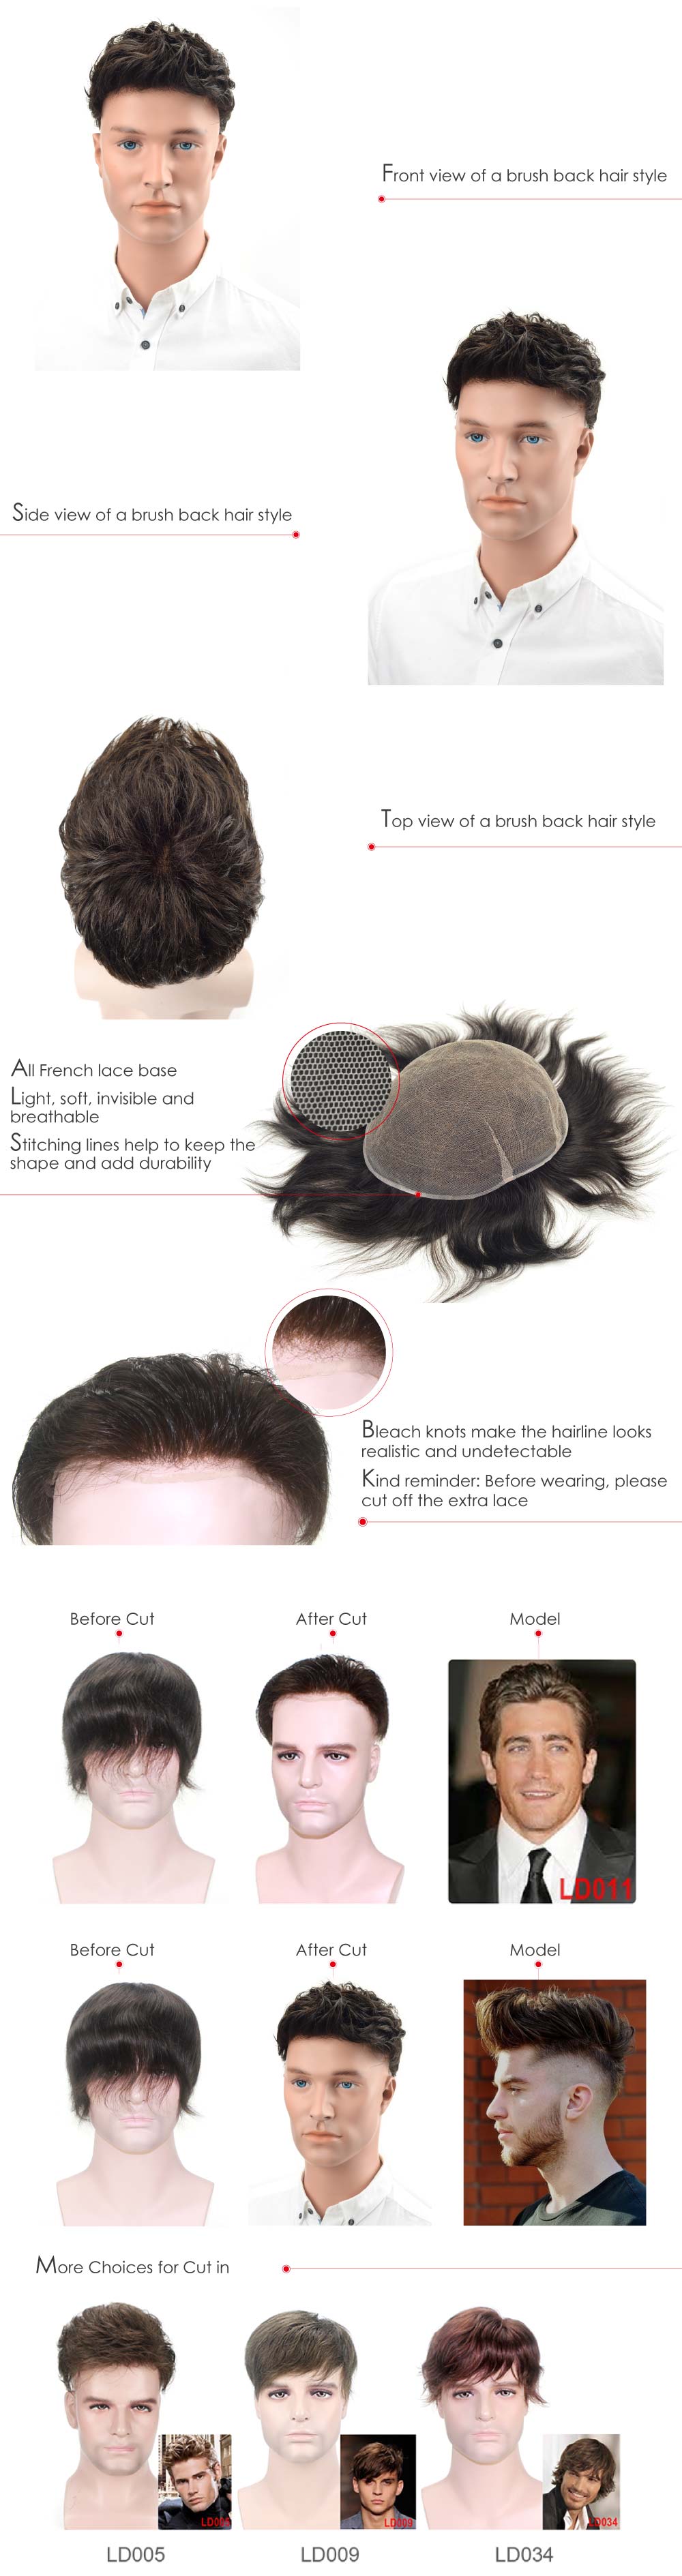 French Lace Hair System from Lordhair